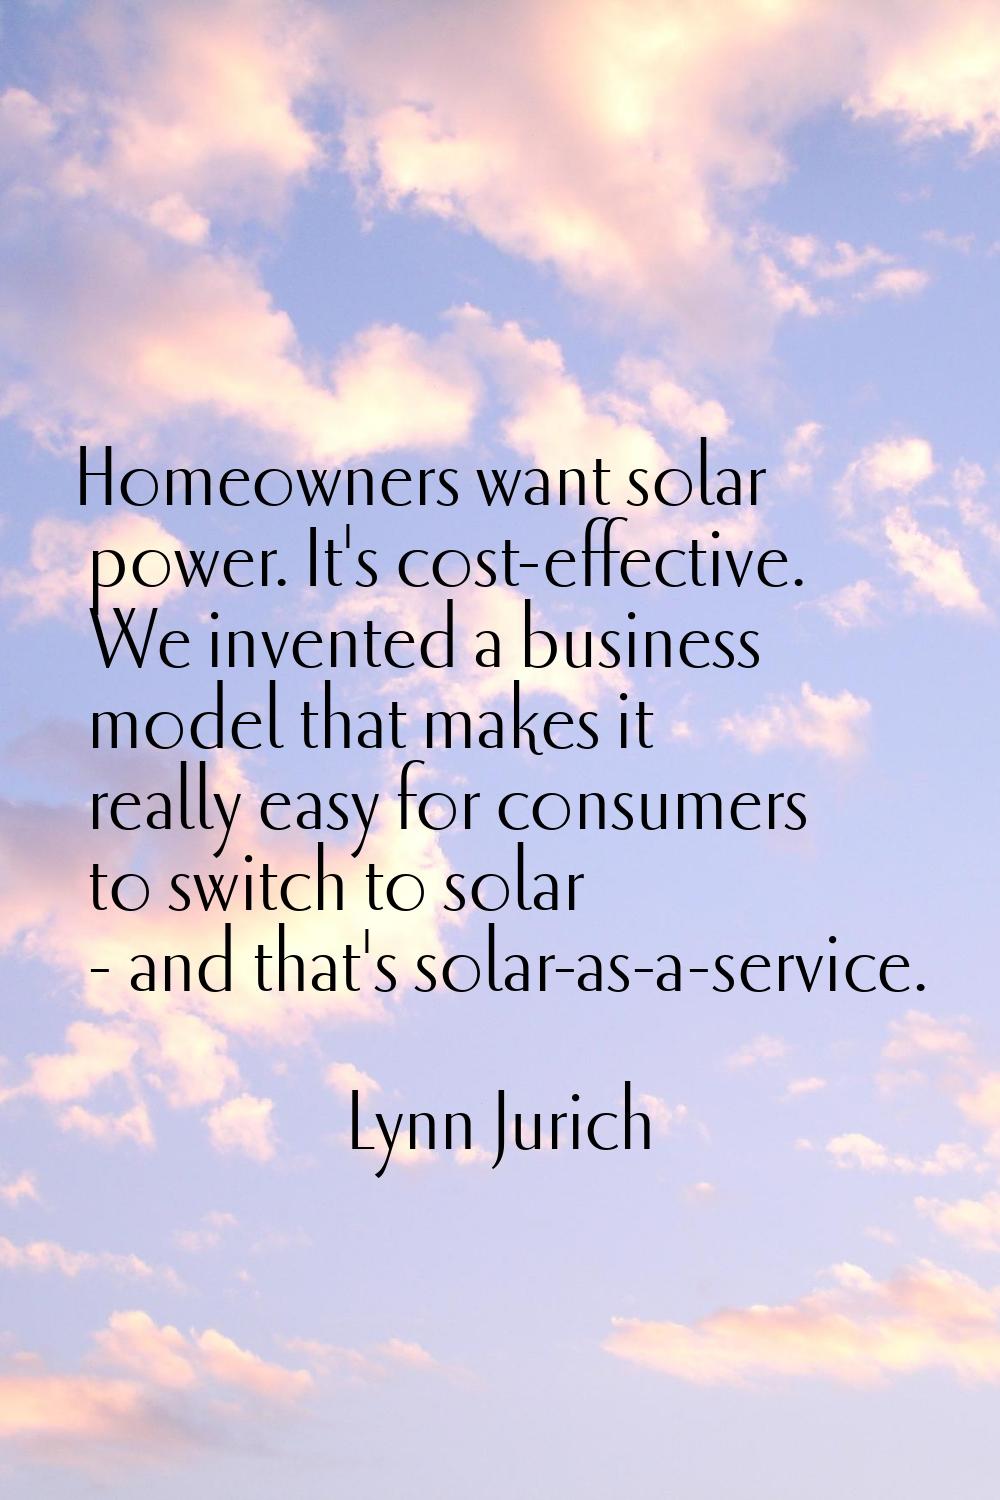 Homeowners want solar power. It's cost-effective. We invented a business model that makes it really